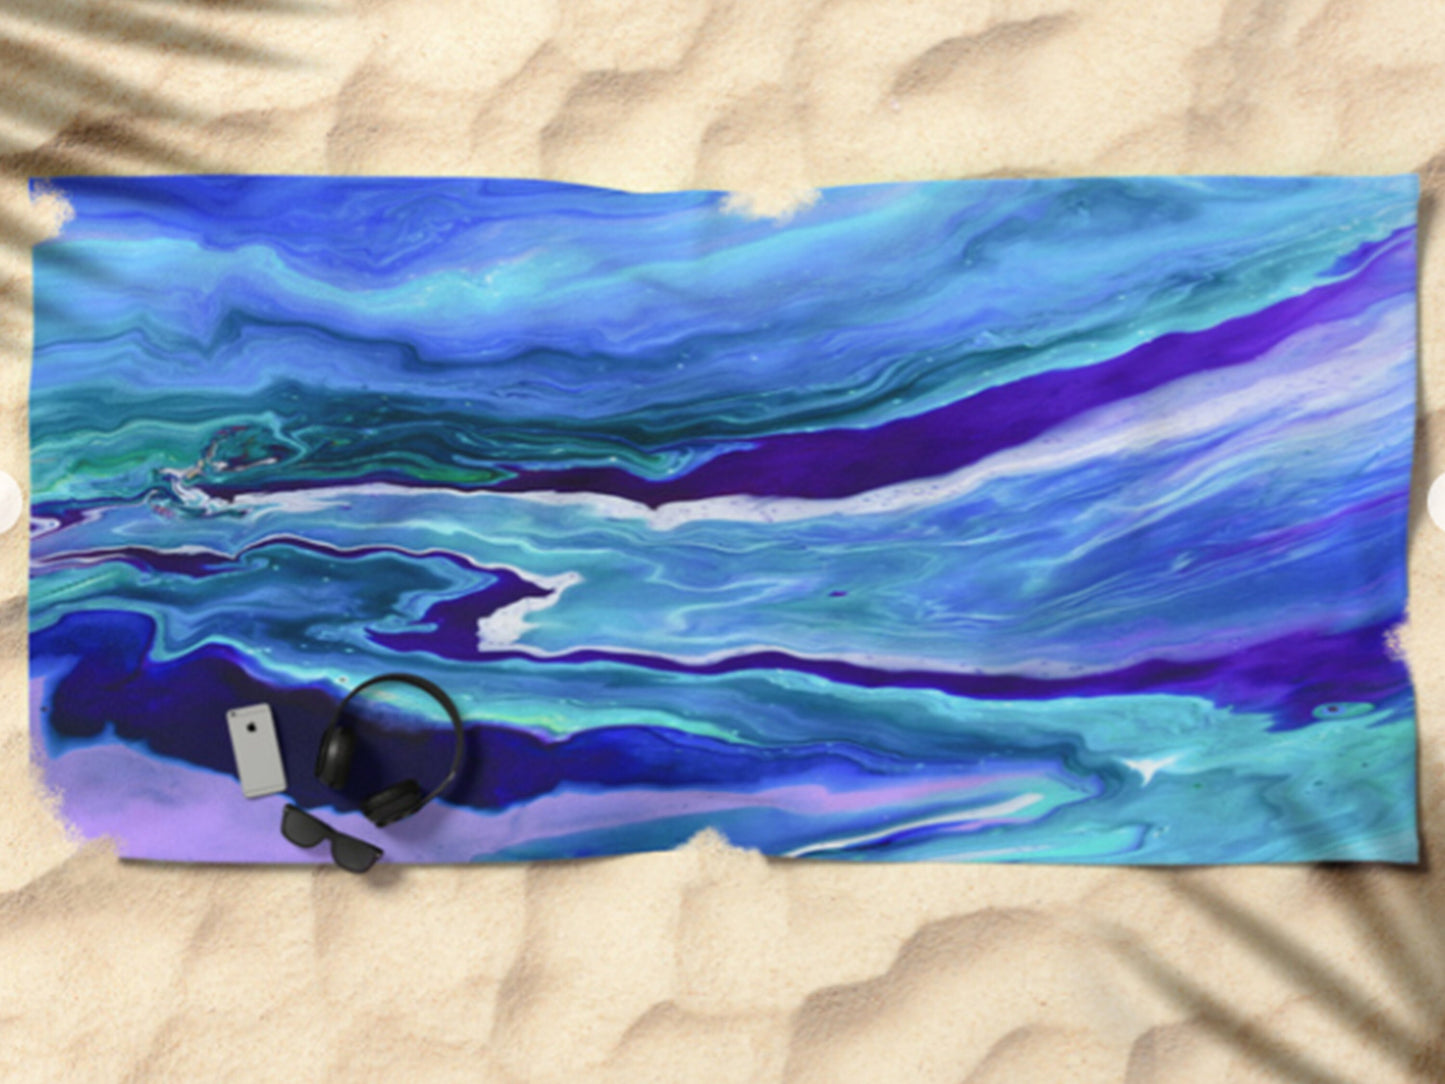 Dreamy Extra Large Beach towel blue towels ocean large beach towel unique gift cheap gifts artsy gift aqua towel xl blue beach towel unique